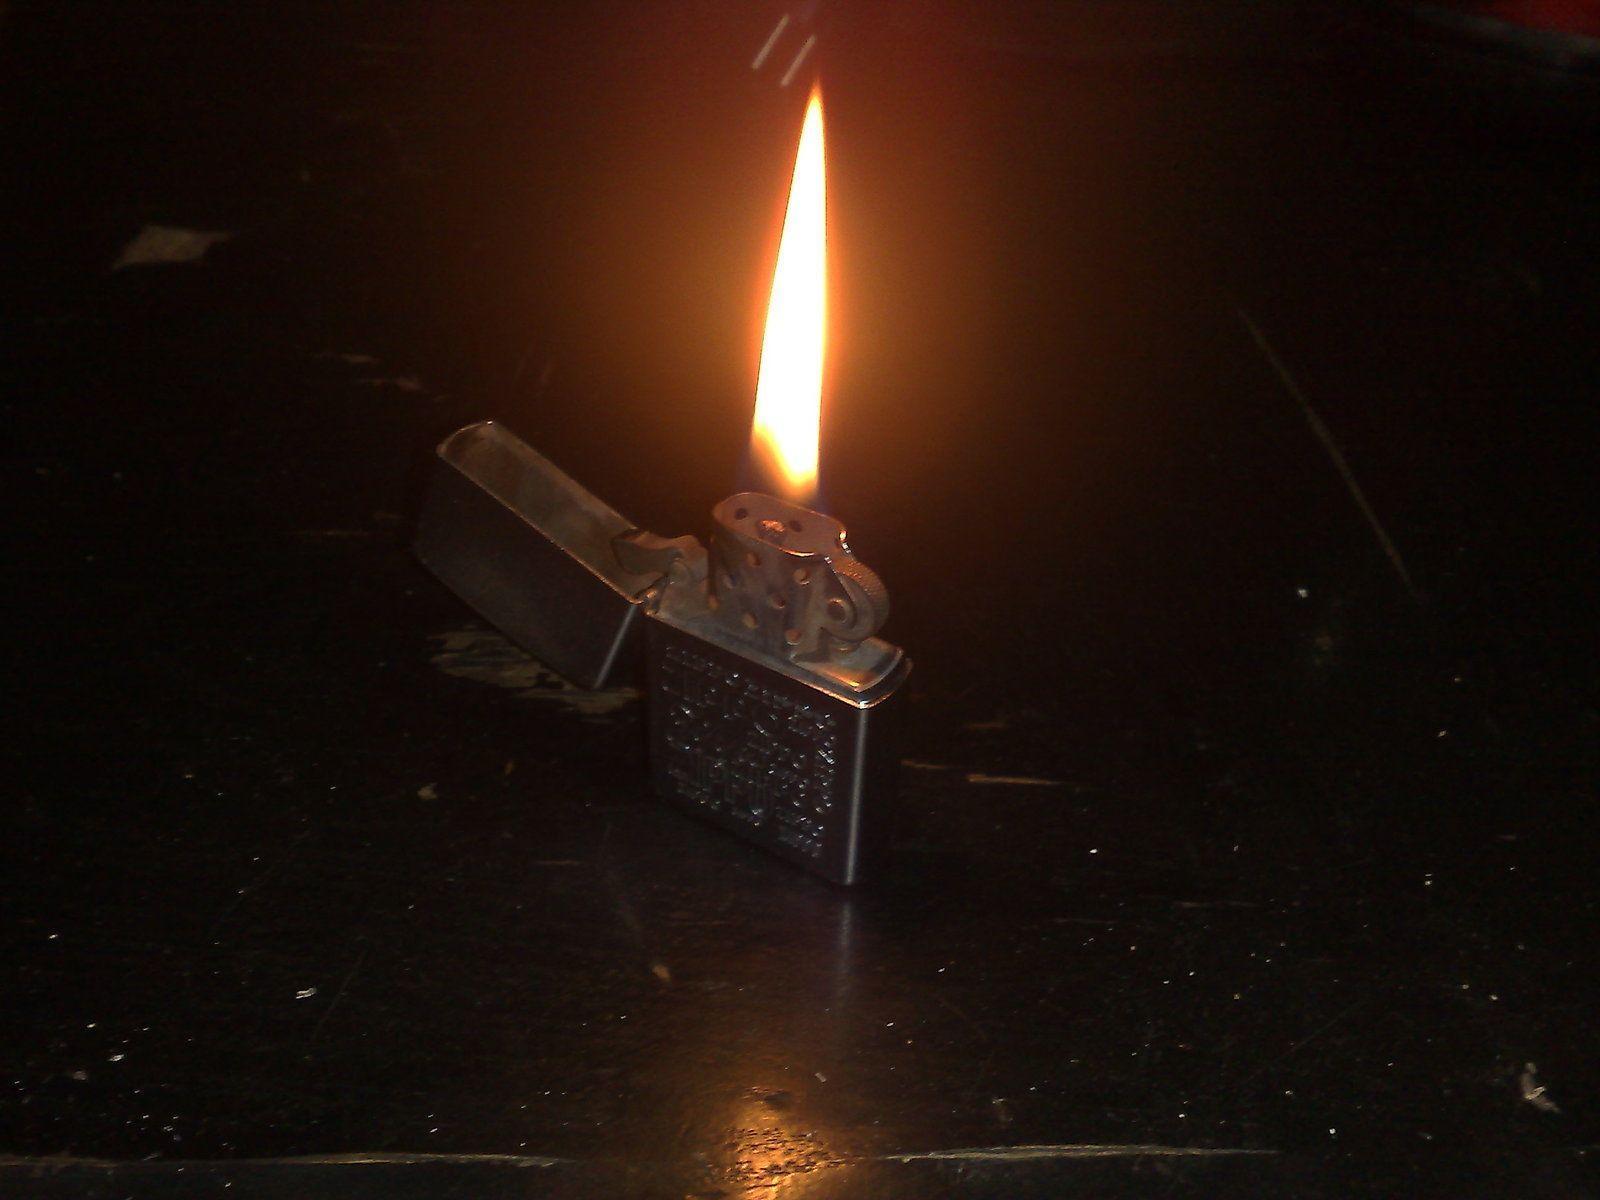 Zippo Lighter Wallpaper 18670 Open Walls Picture Picture